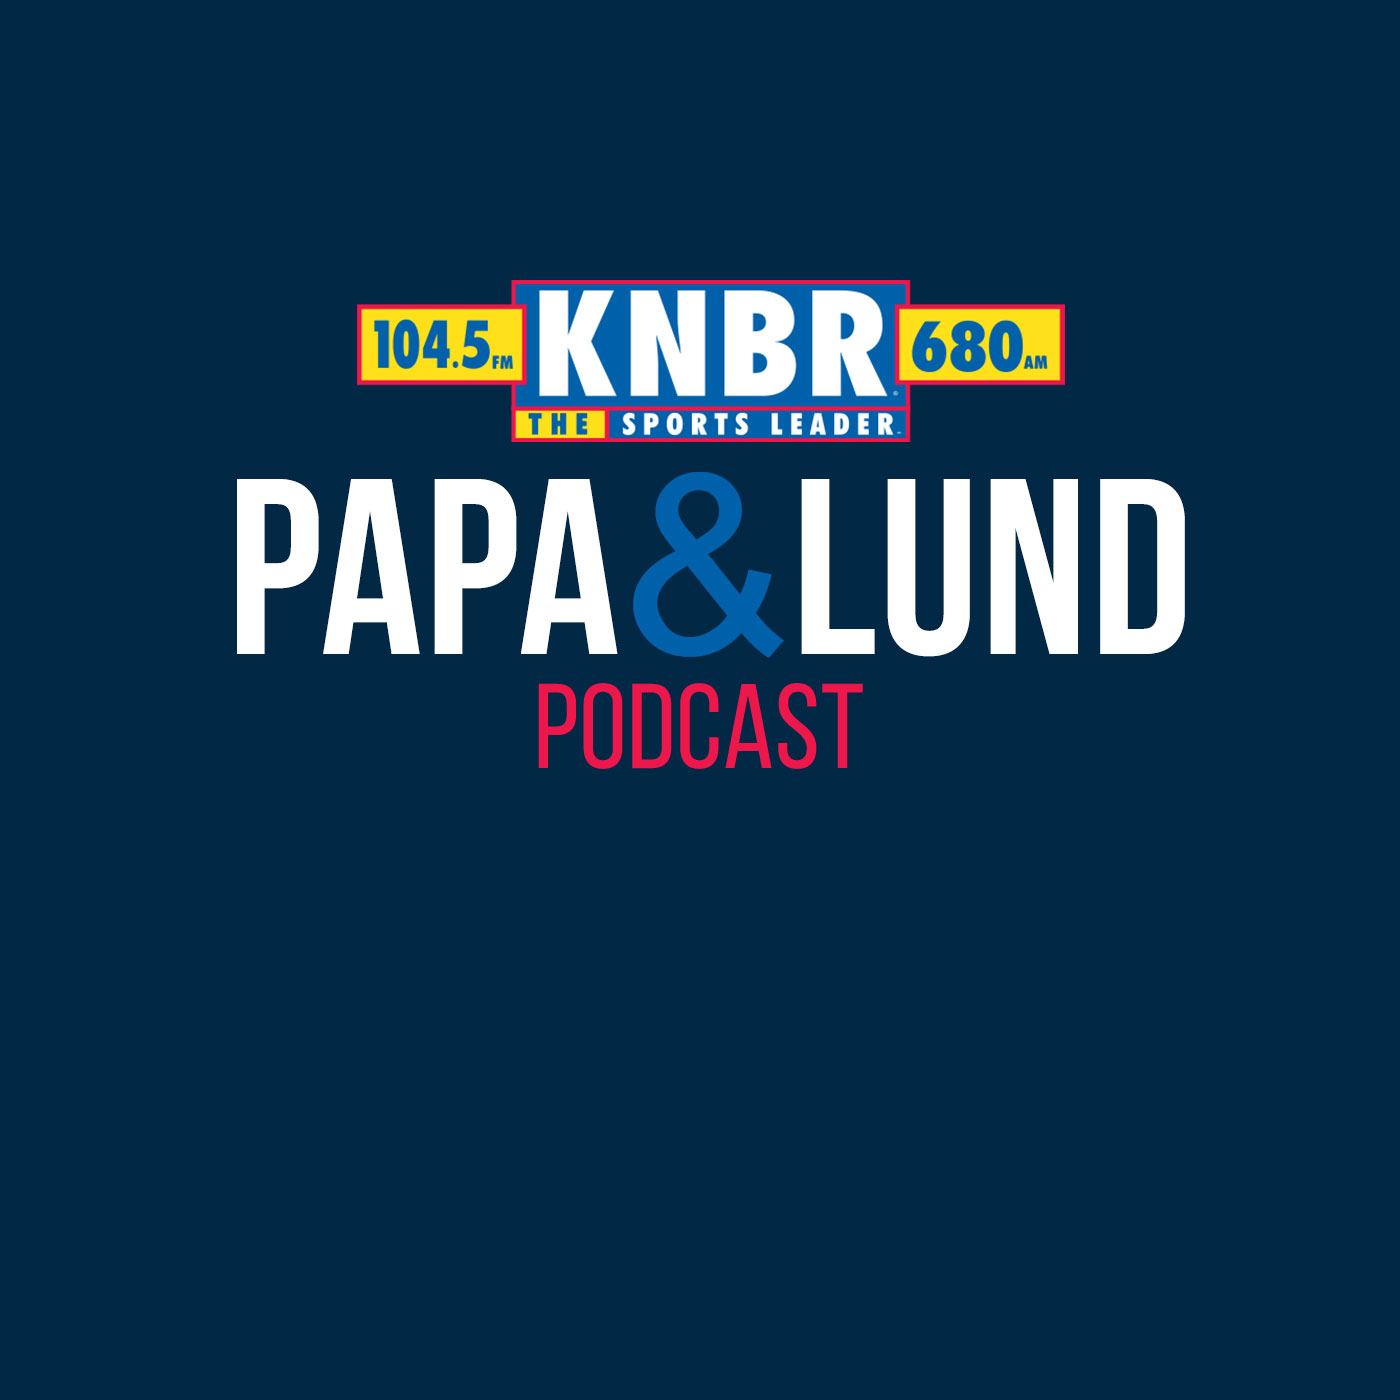 3-17 Chris Mullin joins Papa & Lund to figure out the best Irish/Bay Area athletes on St. Patrick's Day